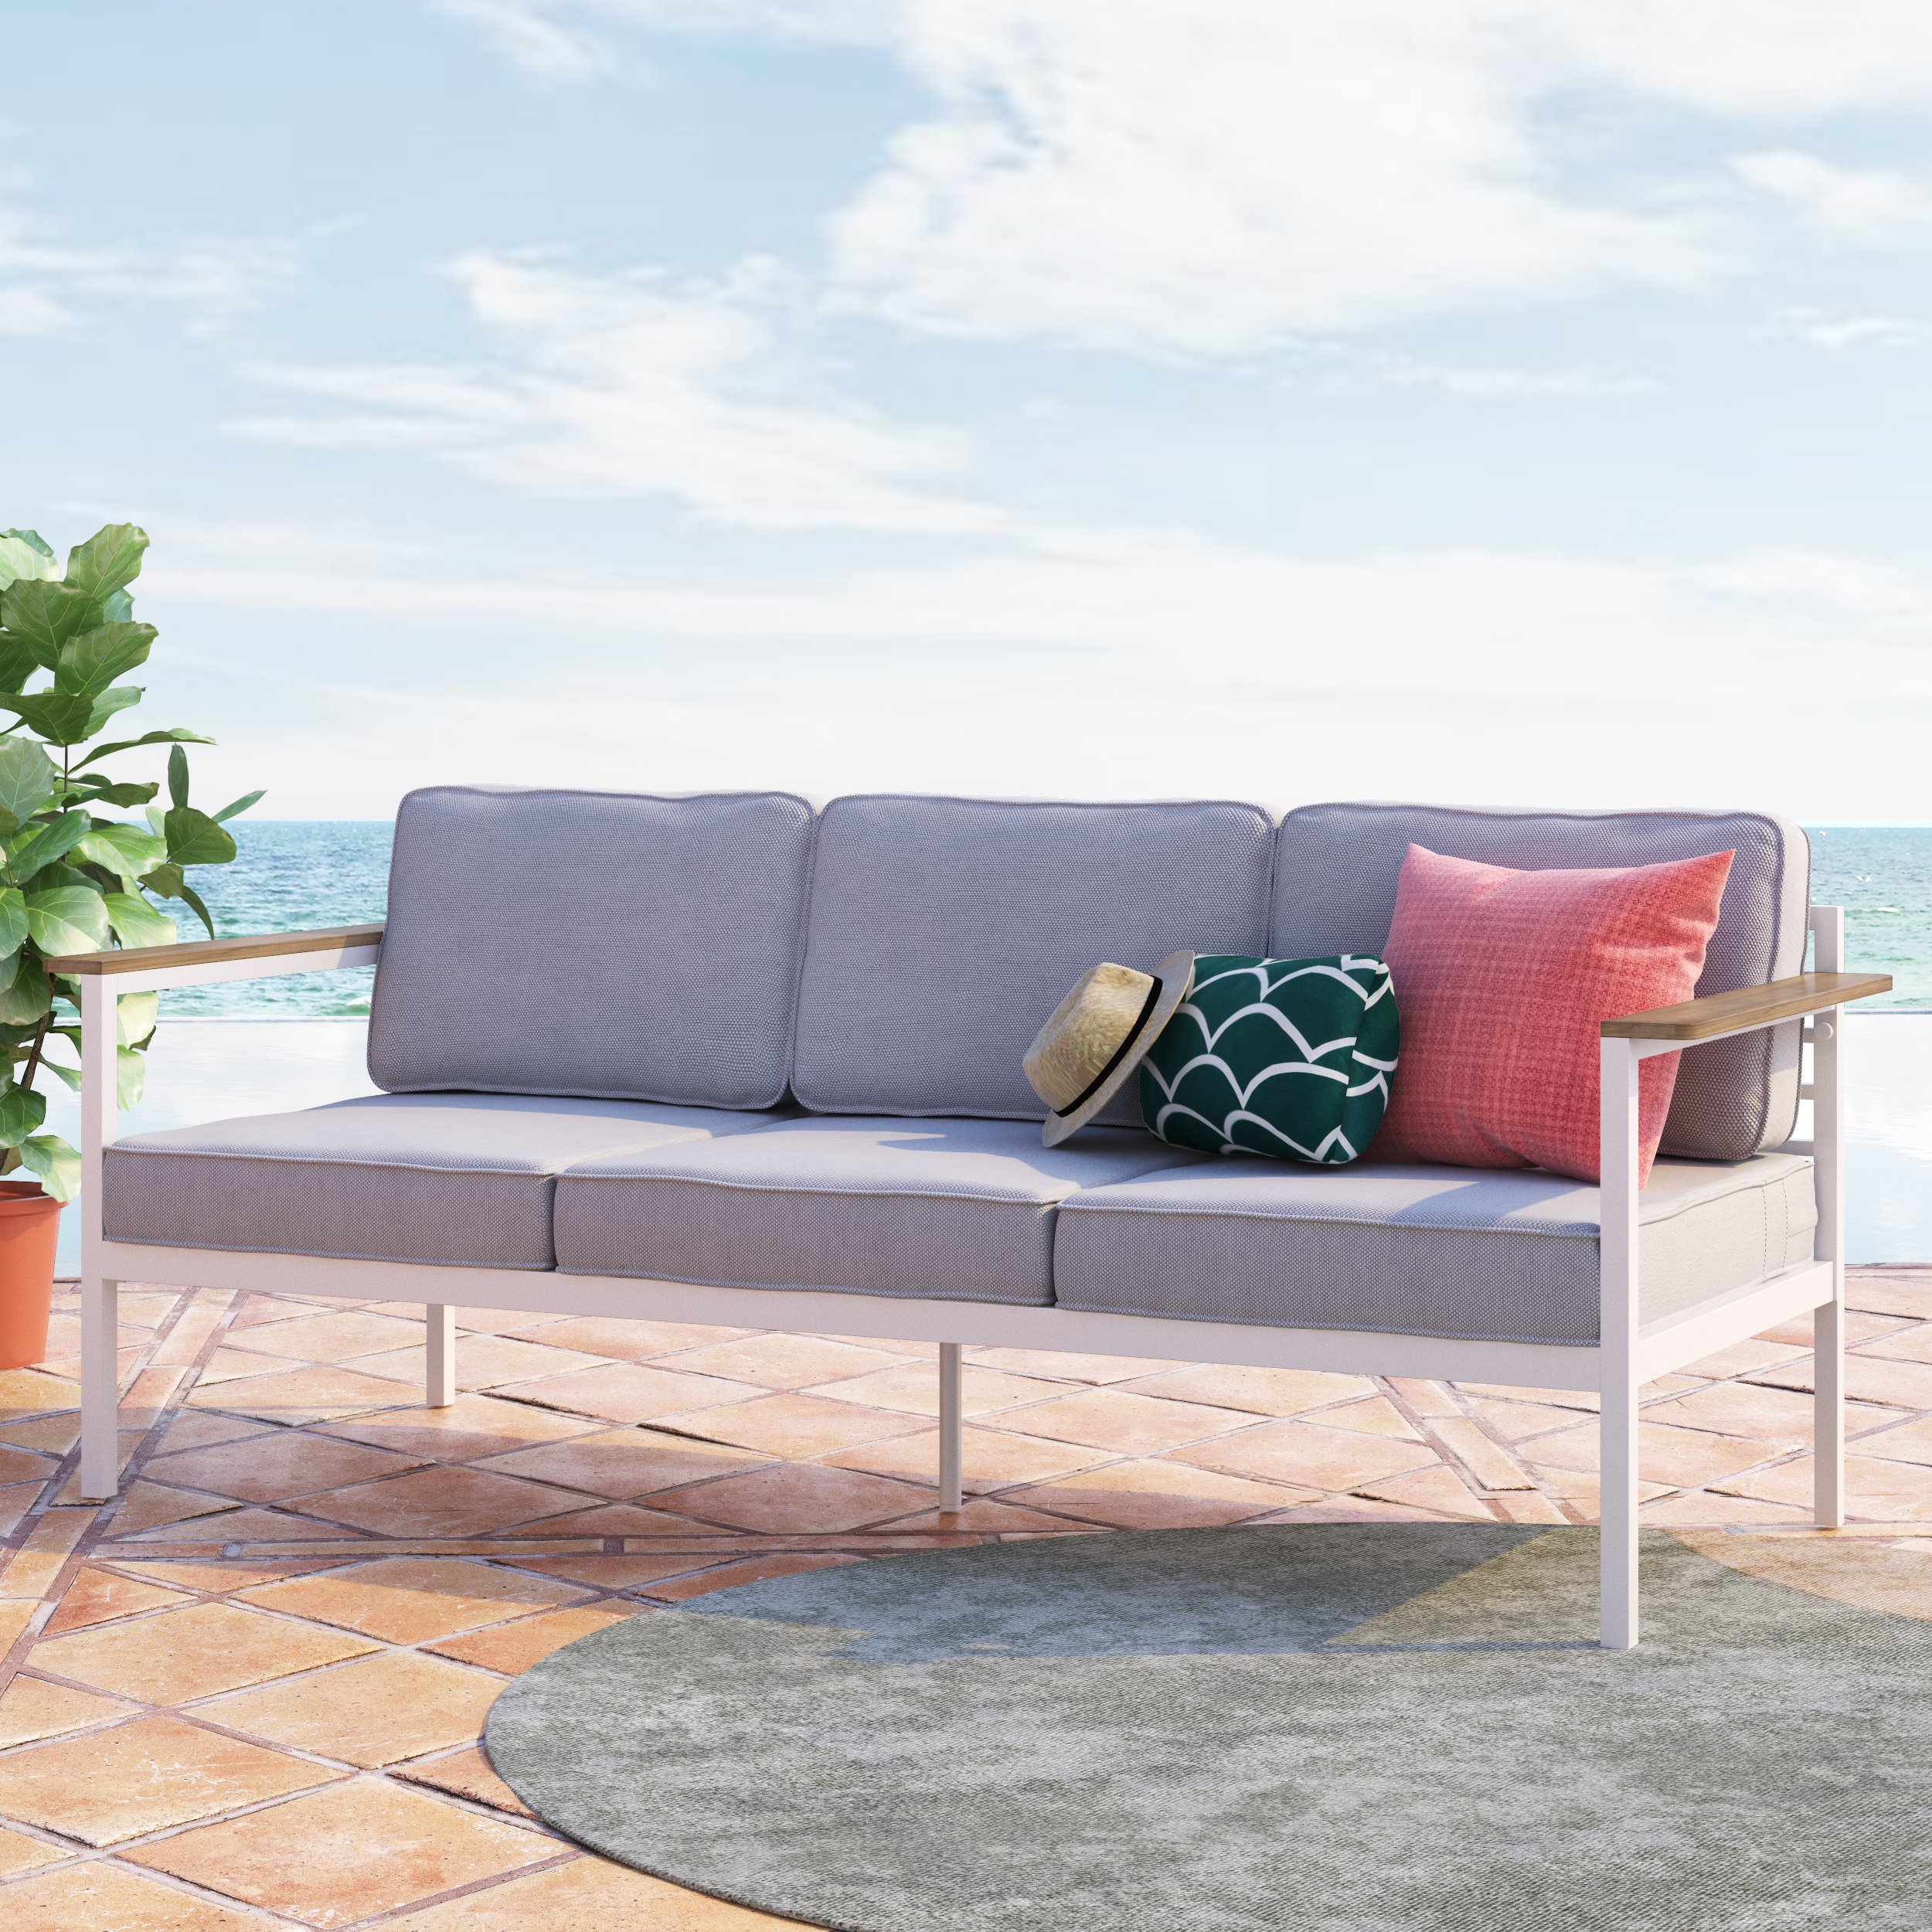 Pablo Aluminum And Acacia Wood Outdoor, Outdoor Wood Sofa With Cushions